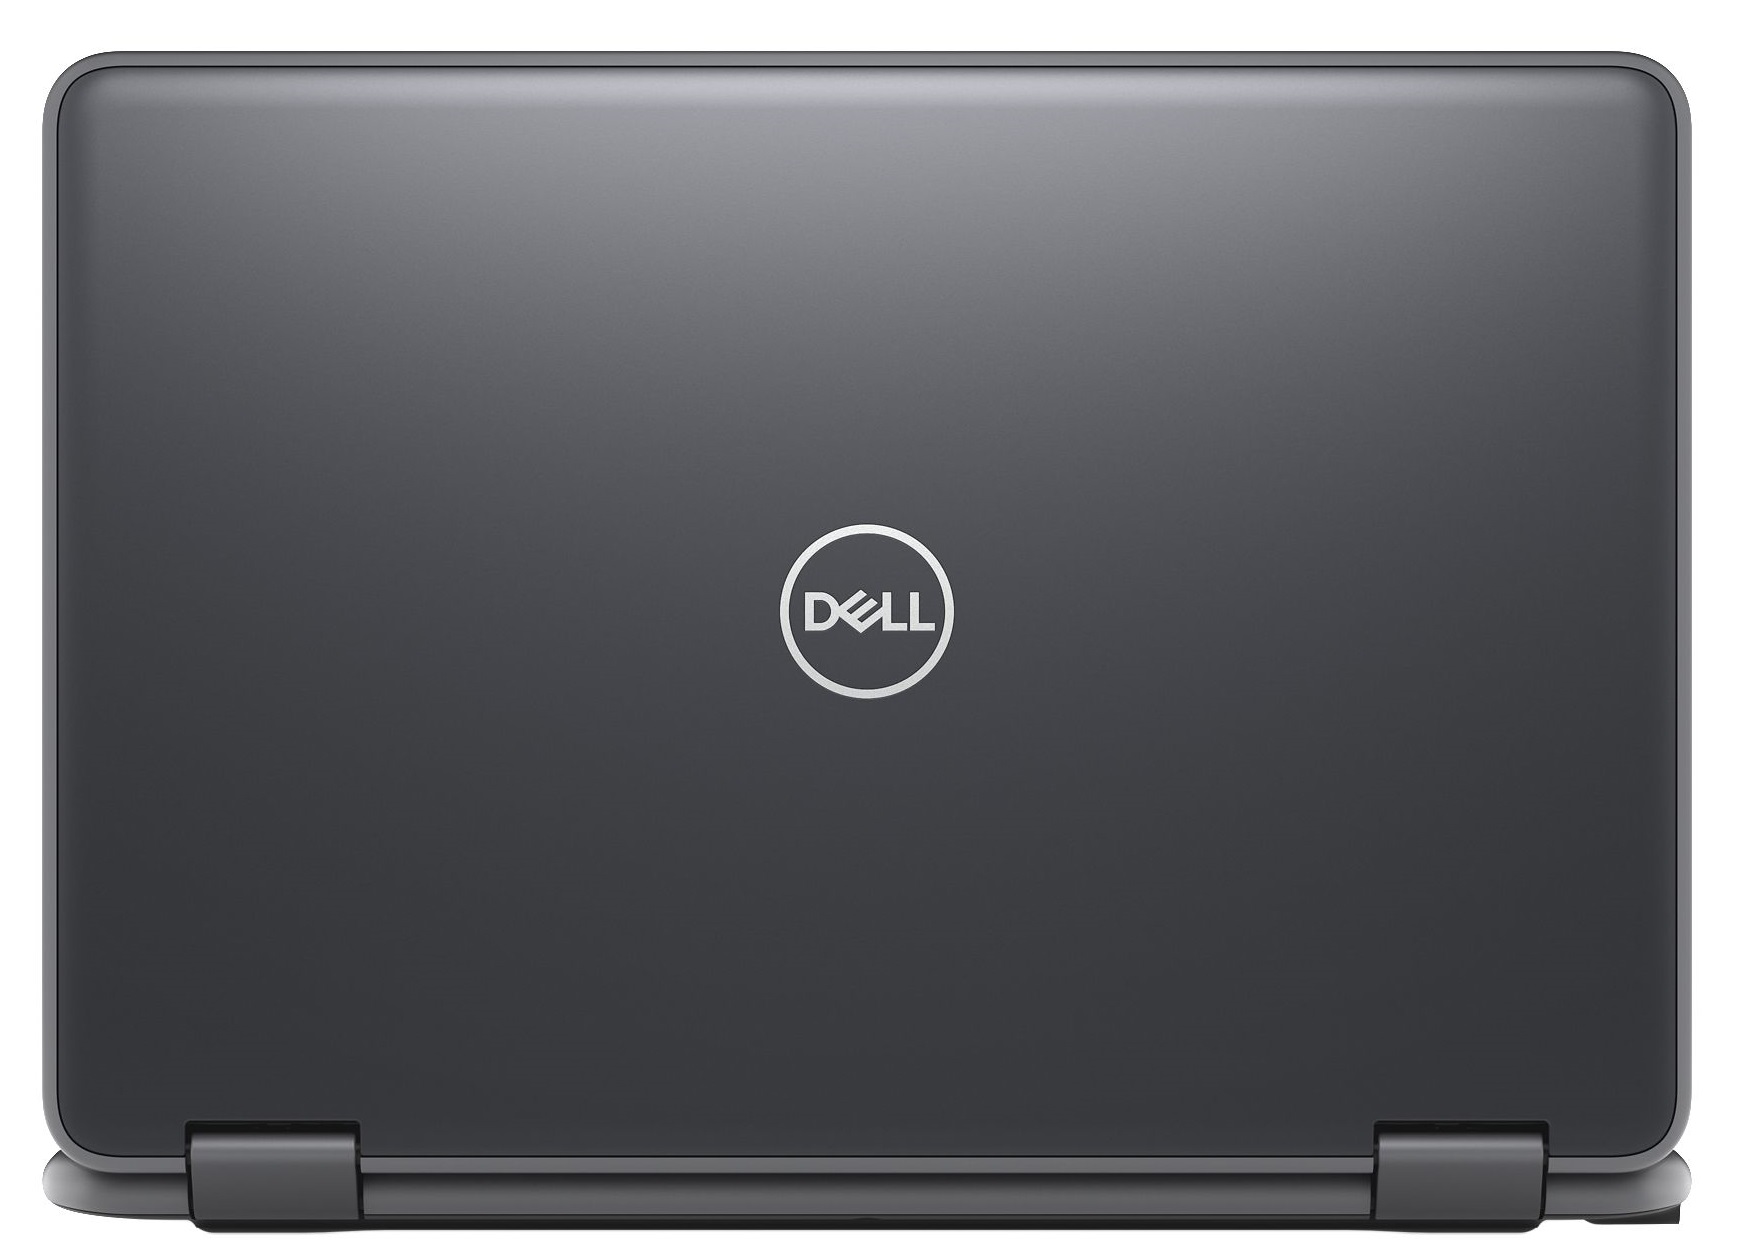 Dell Latitude 11 3190 (2-in-1) review - kid-proof or kid-resistant |  LaptopMedia UK